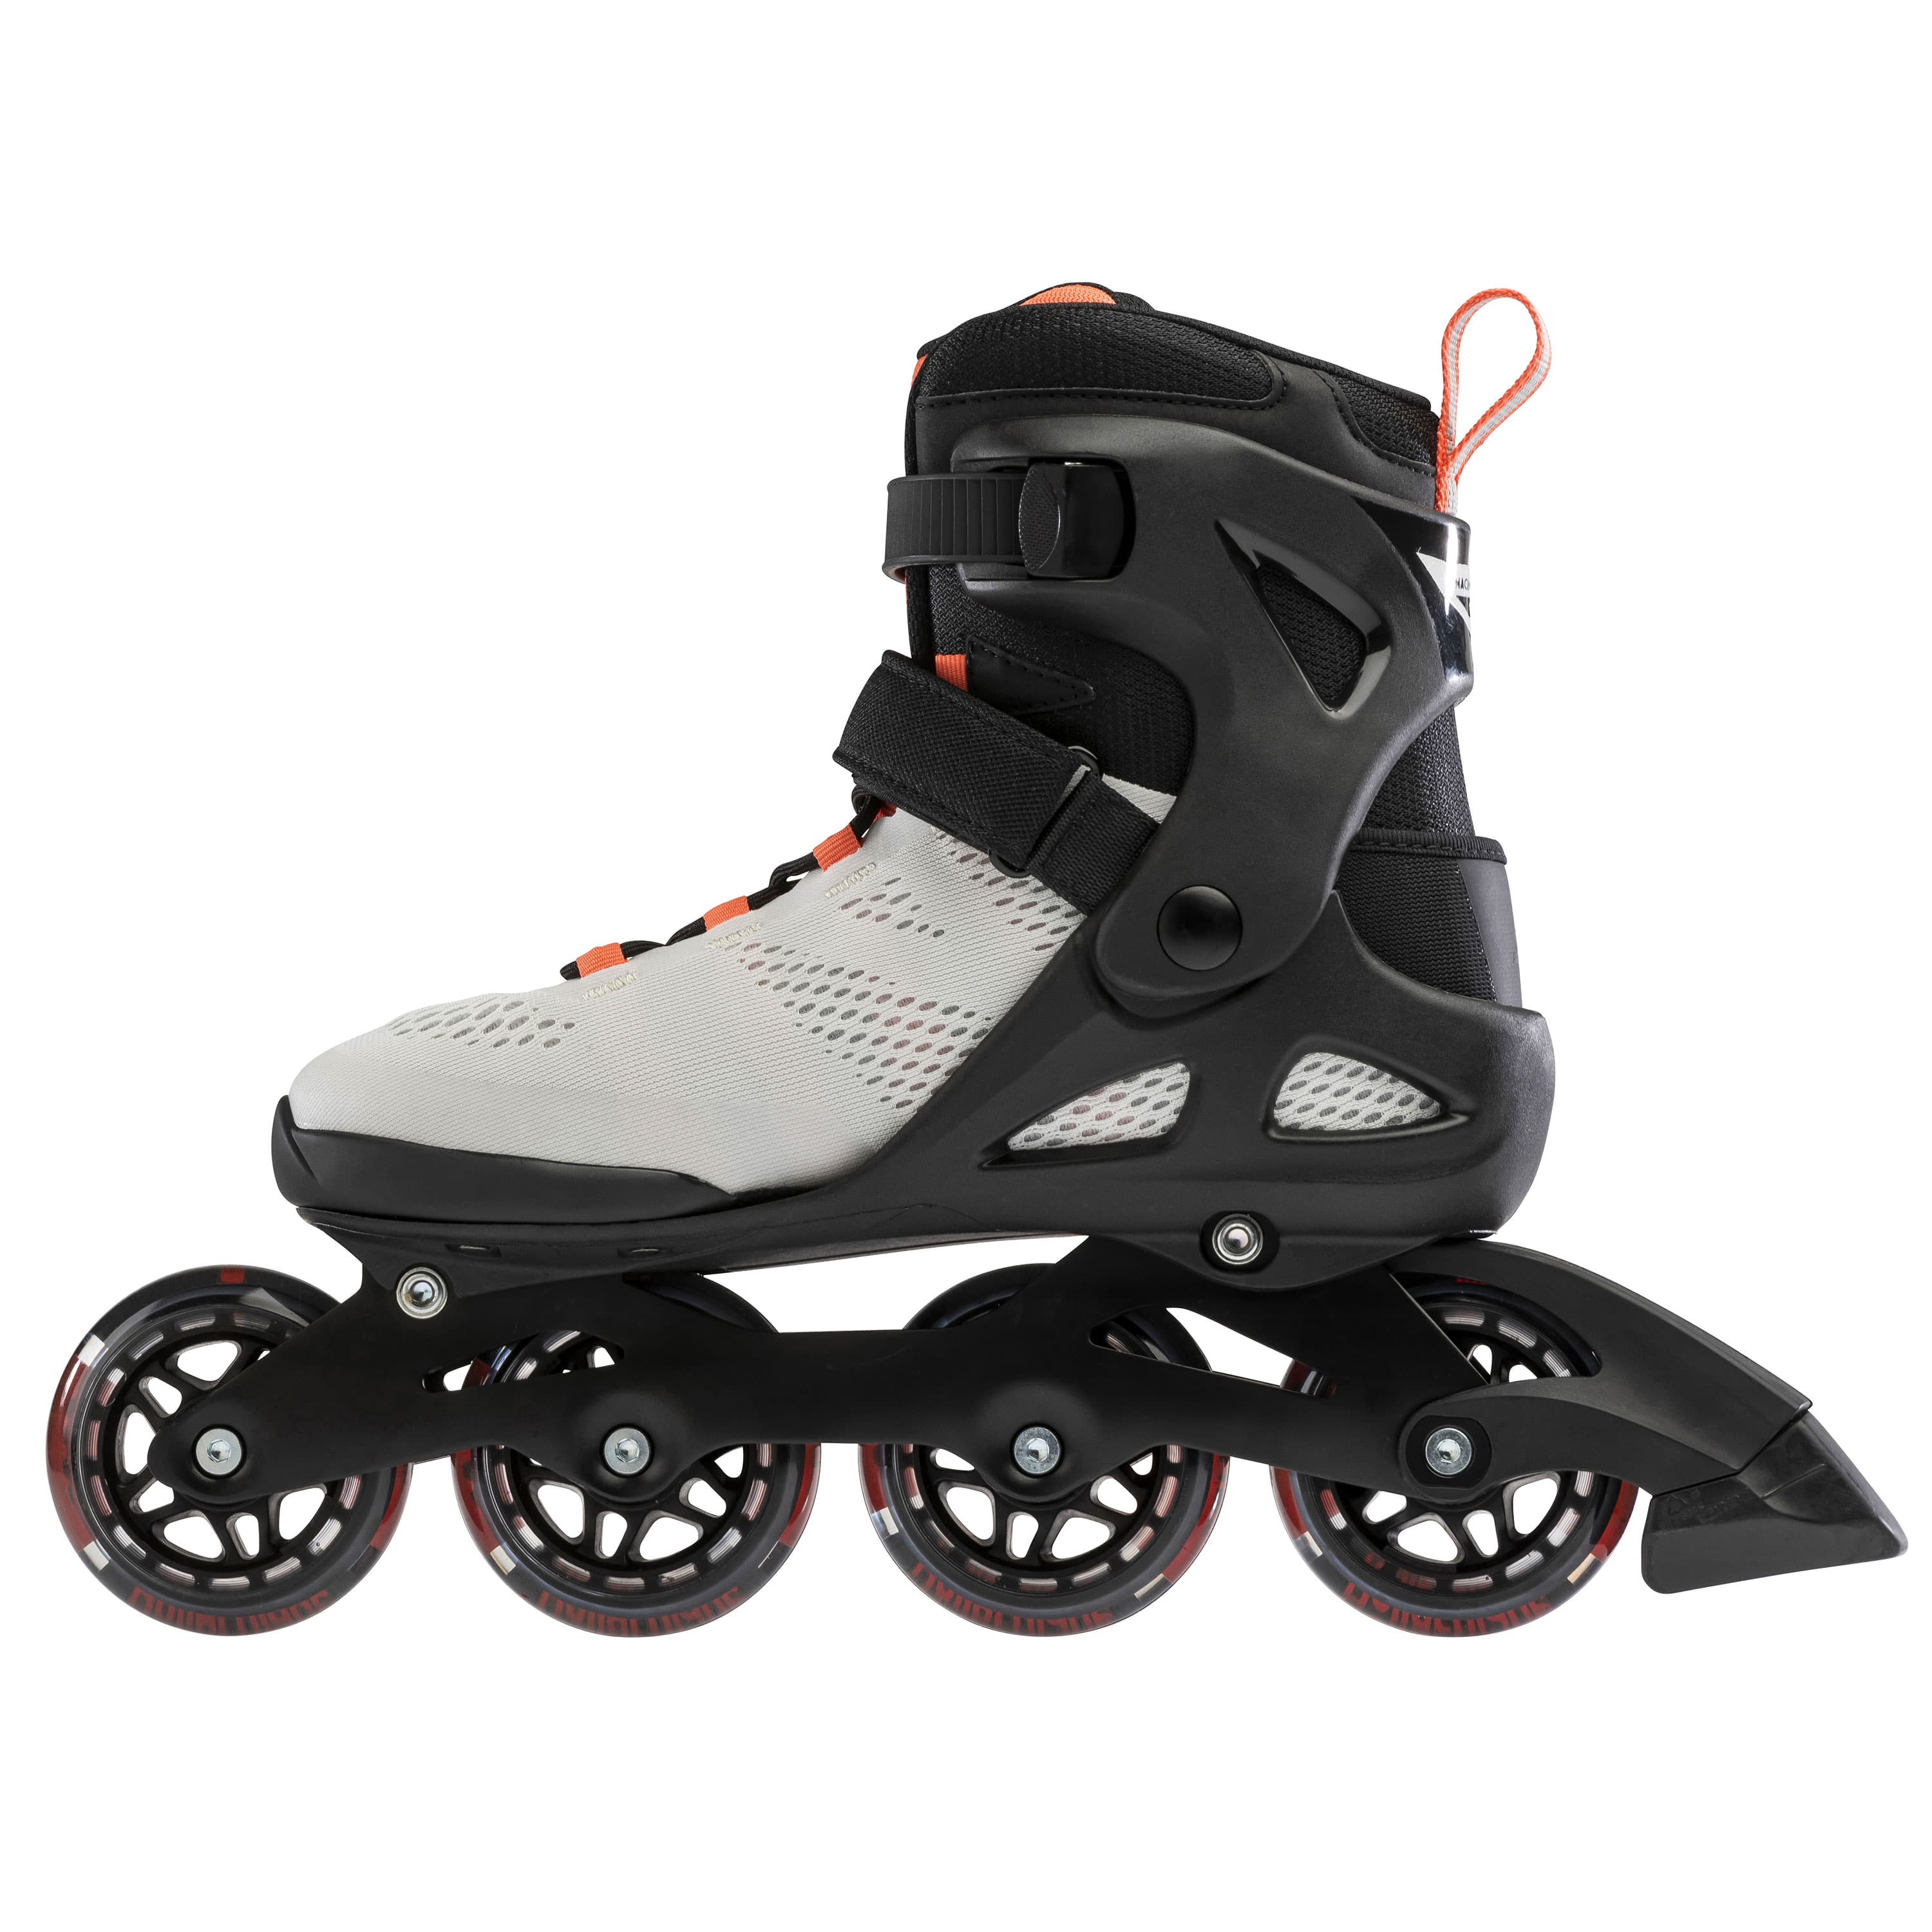 Rollerblade Mujer Macroblade 80 W Fitness Patines